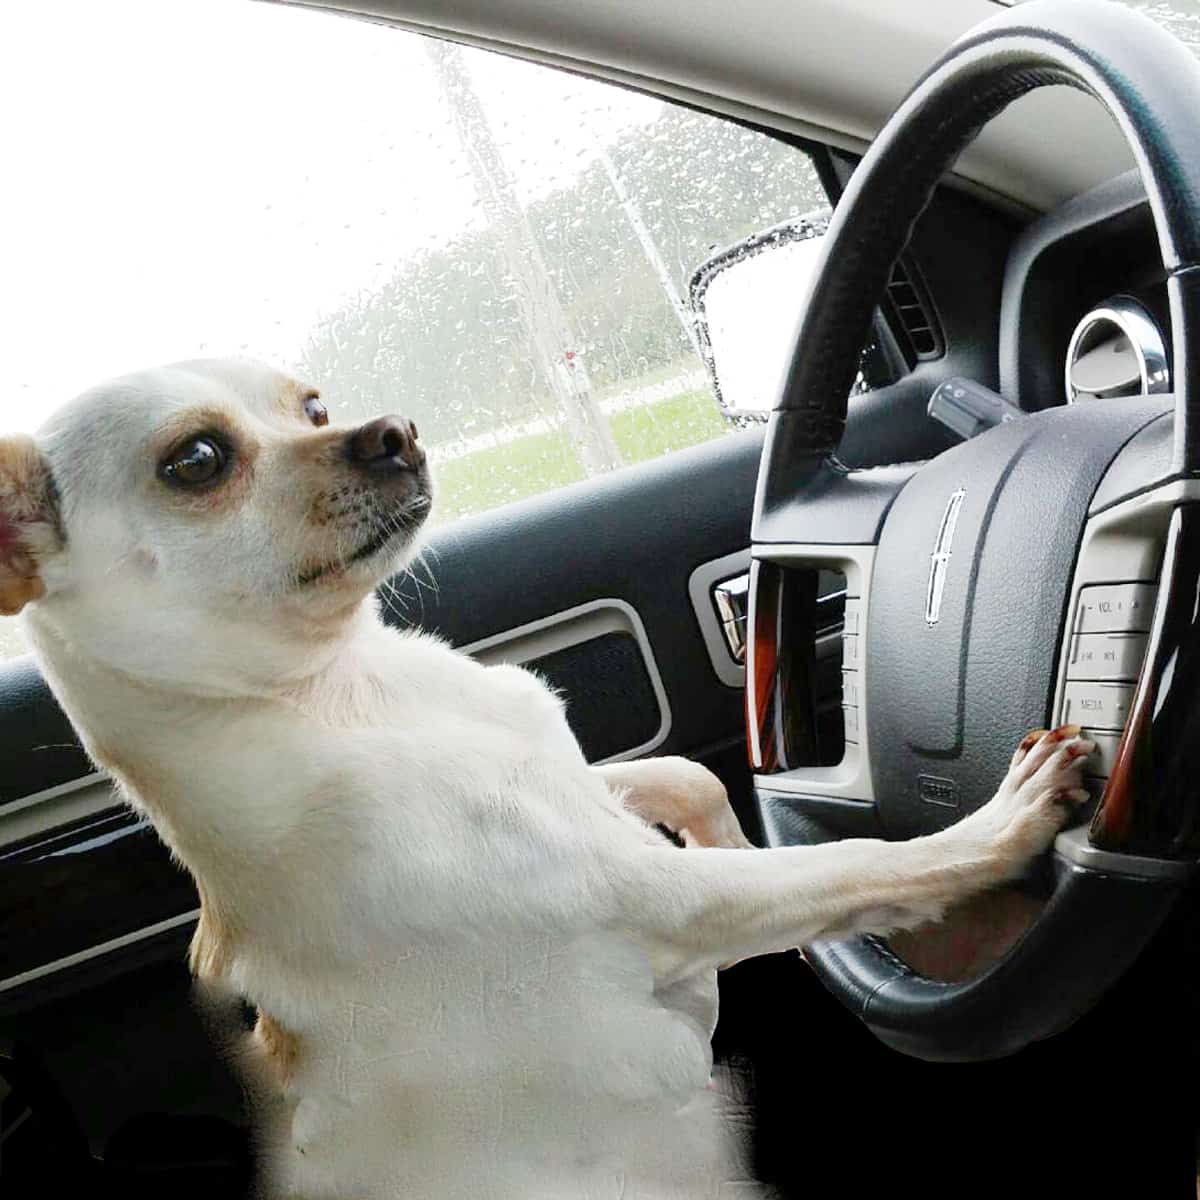 A dog with his paws on a steering wheel.